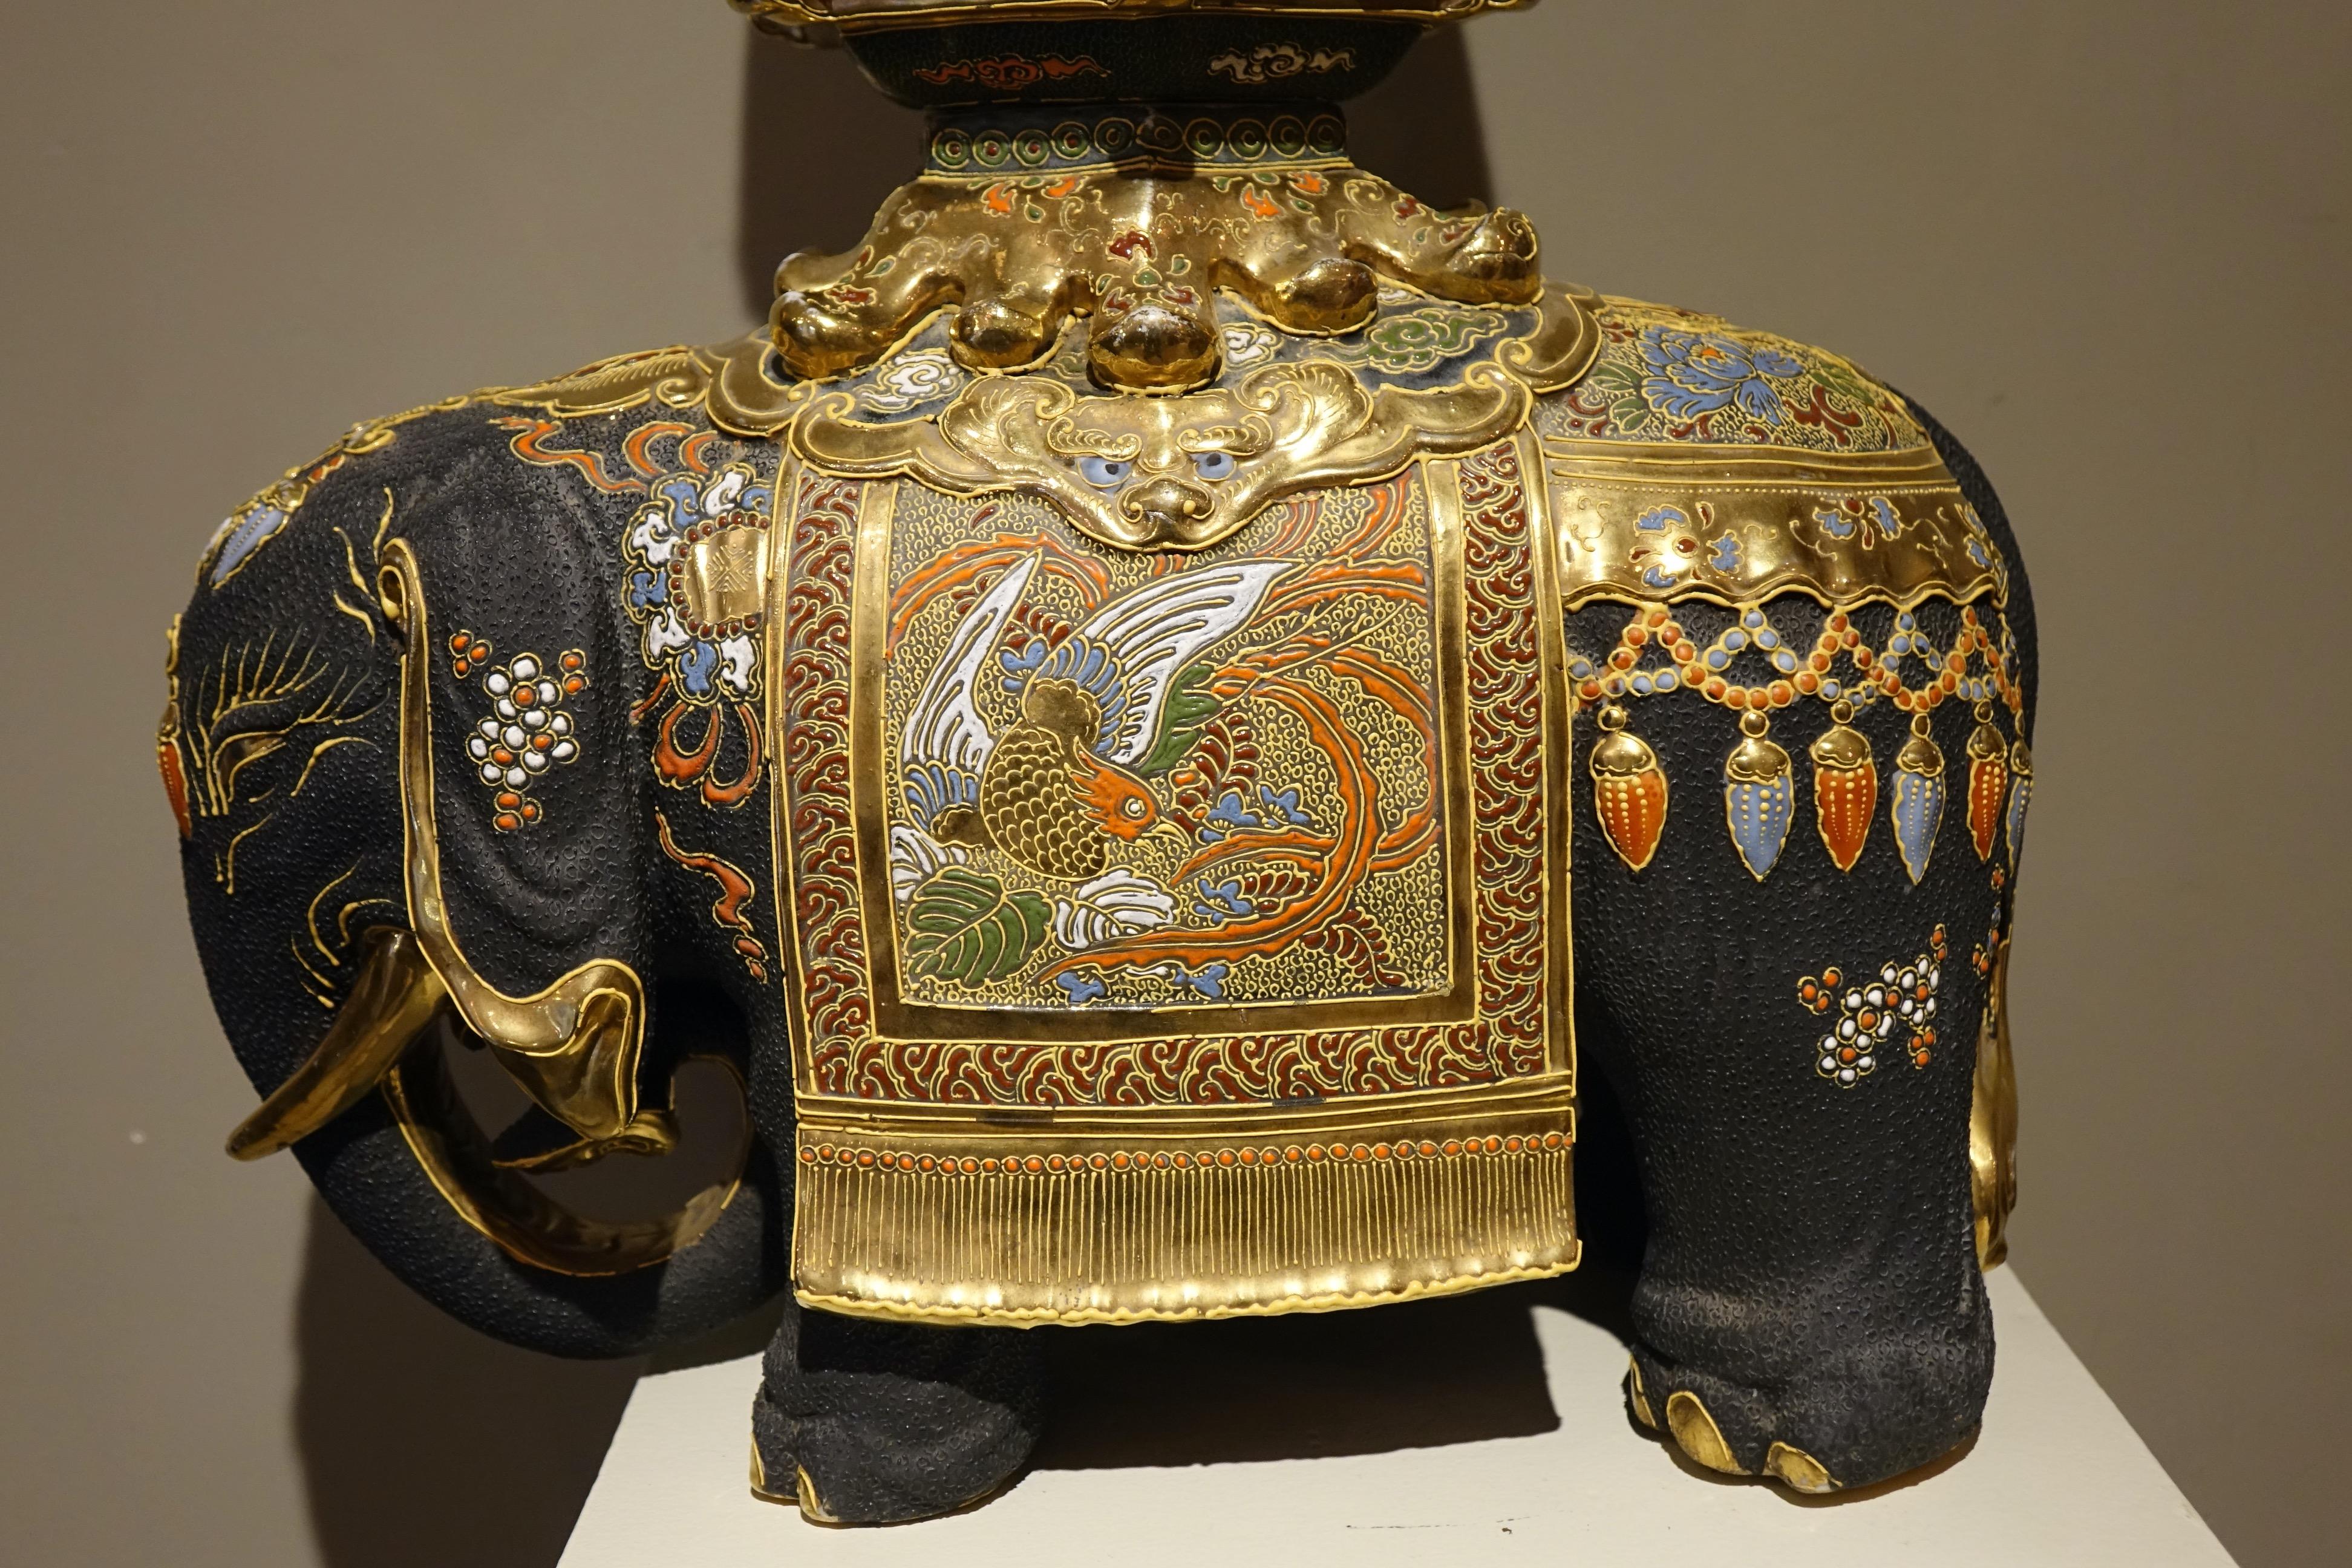 Rare elephant with its palanquin representing a pagoda, made in several parts.
Probably designed to serve as a table centerpiece, it is provided with a rod that can be electrically connected to make a lamp.
Satsuma porcelain, Japan, late 19th